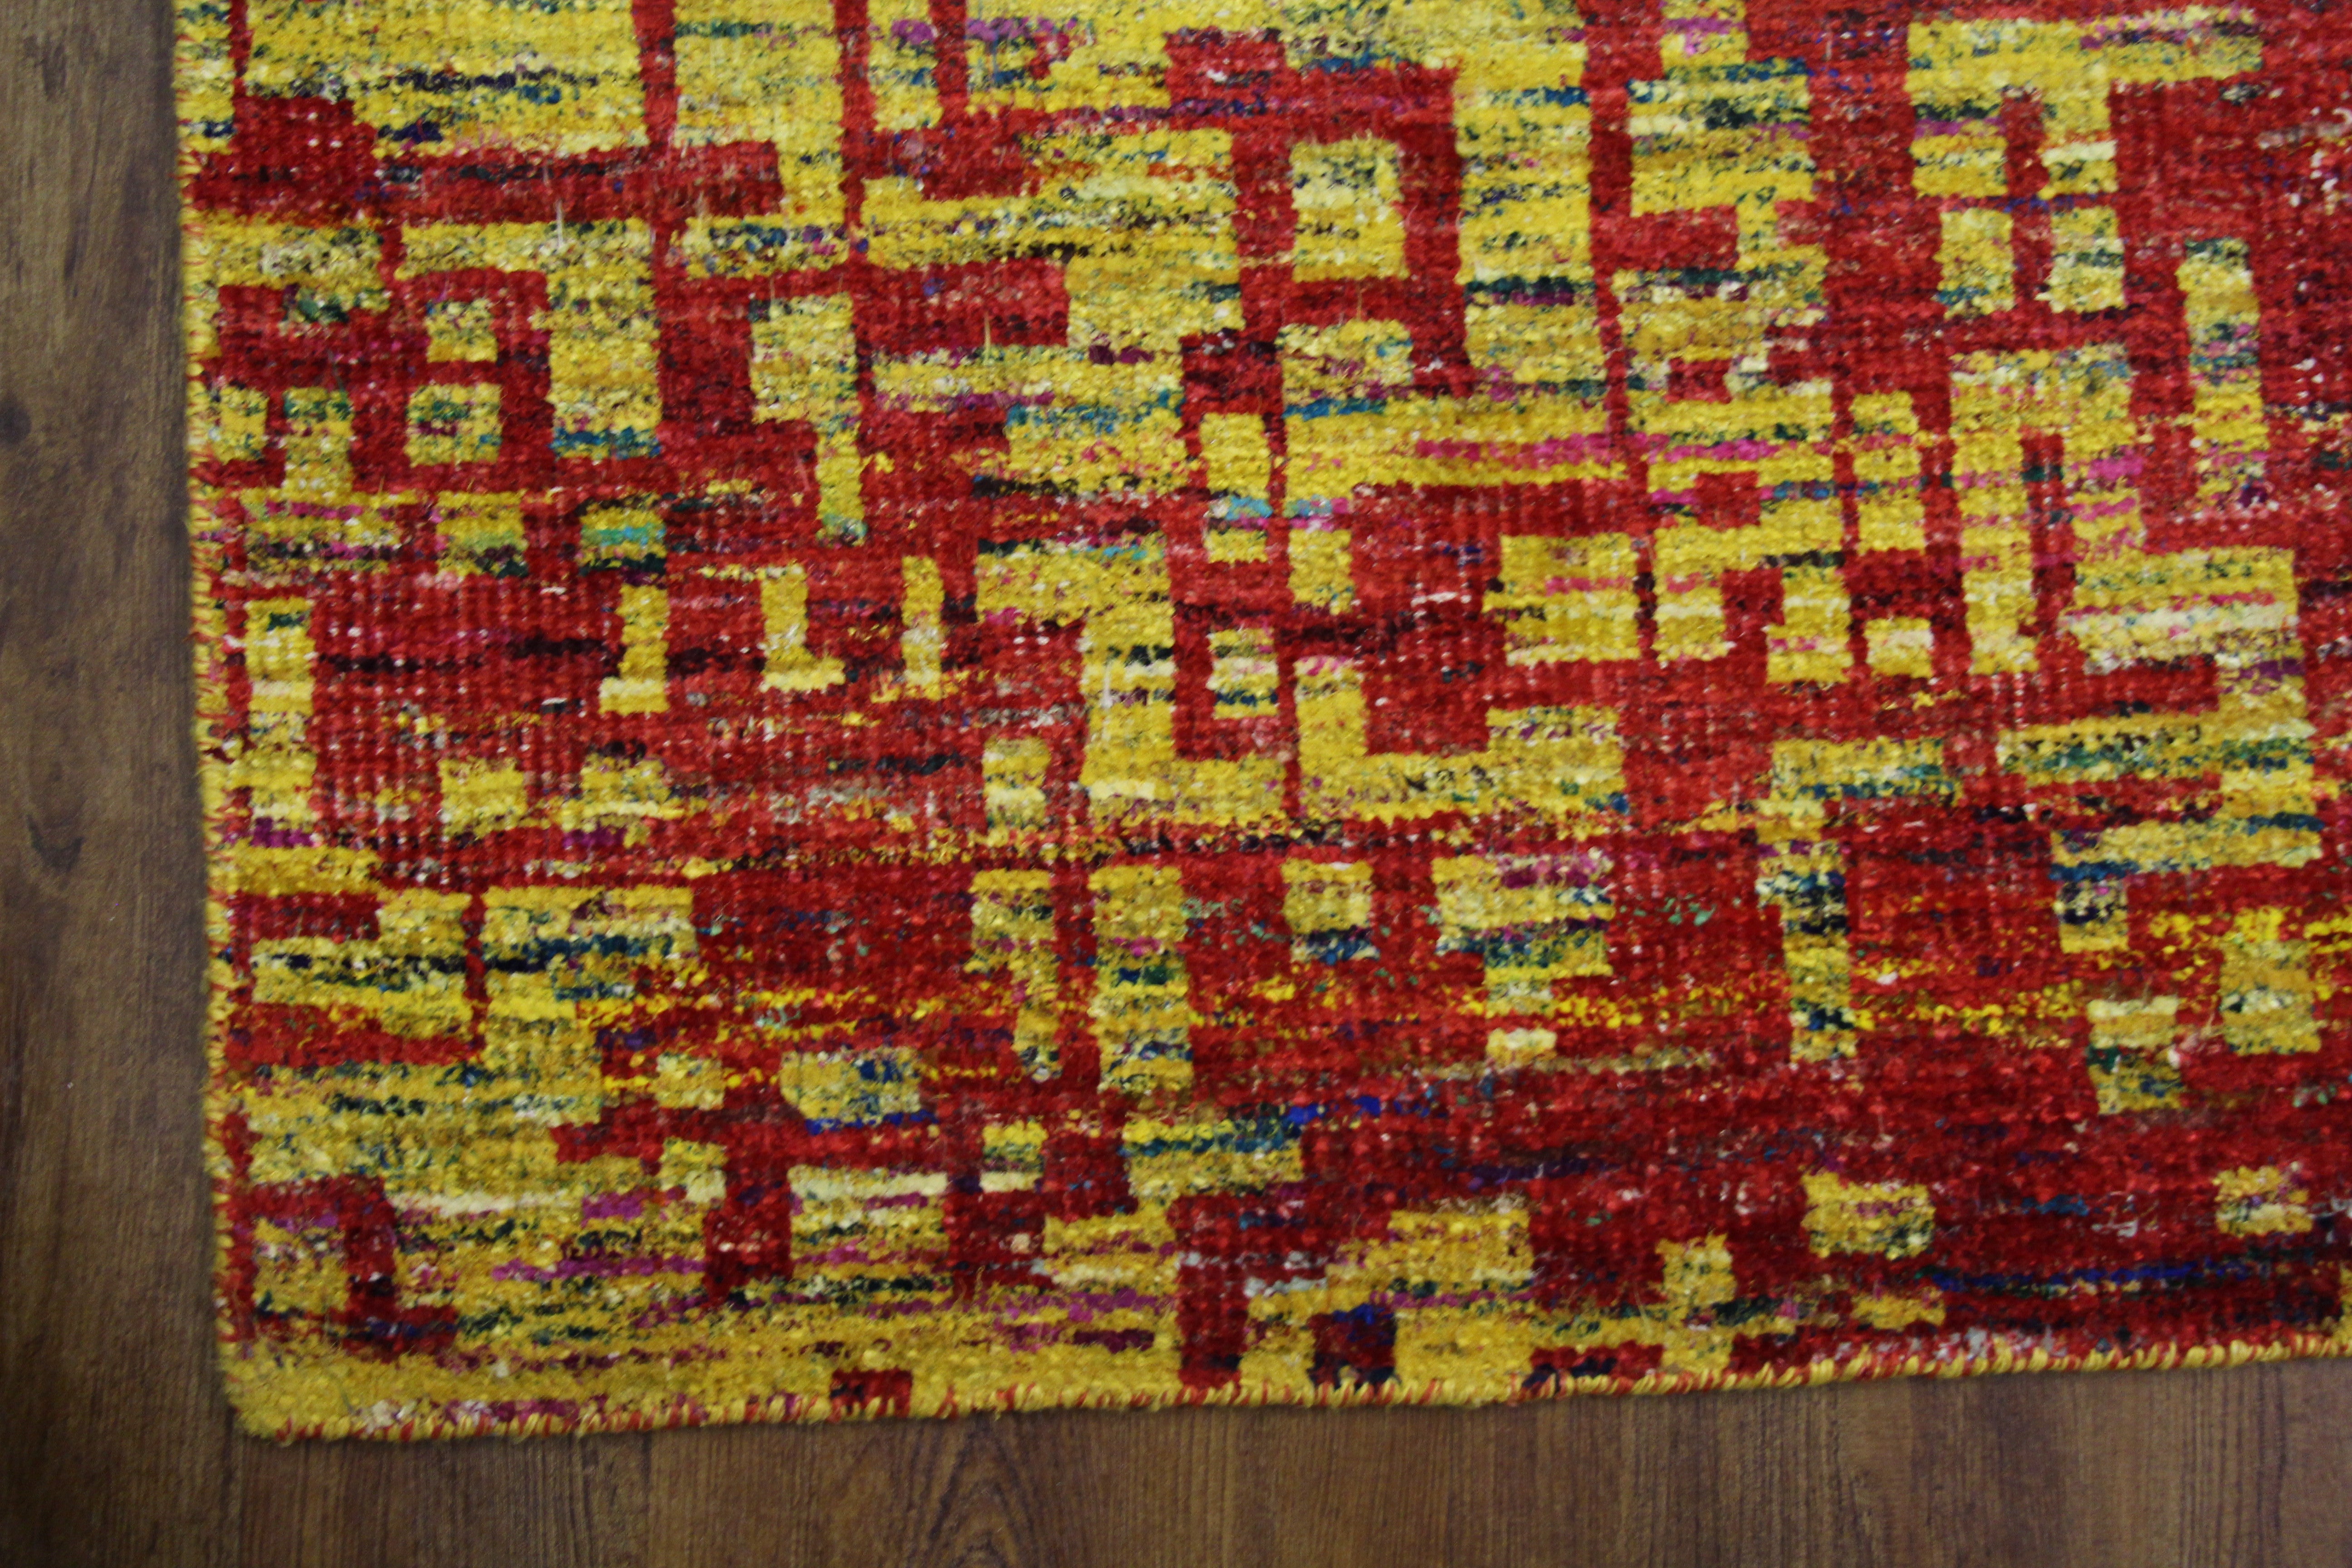 Yellow & Red Indian Sari Art Silk 6x8 One Of a Kind Rug 2860 - west of hudson